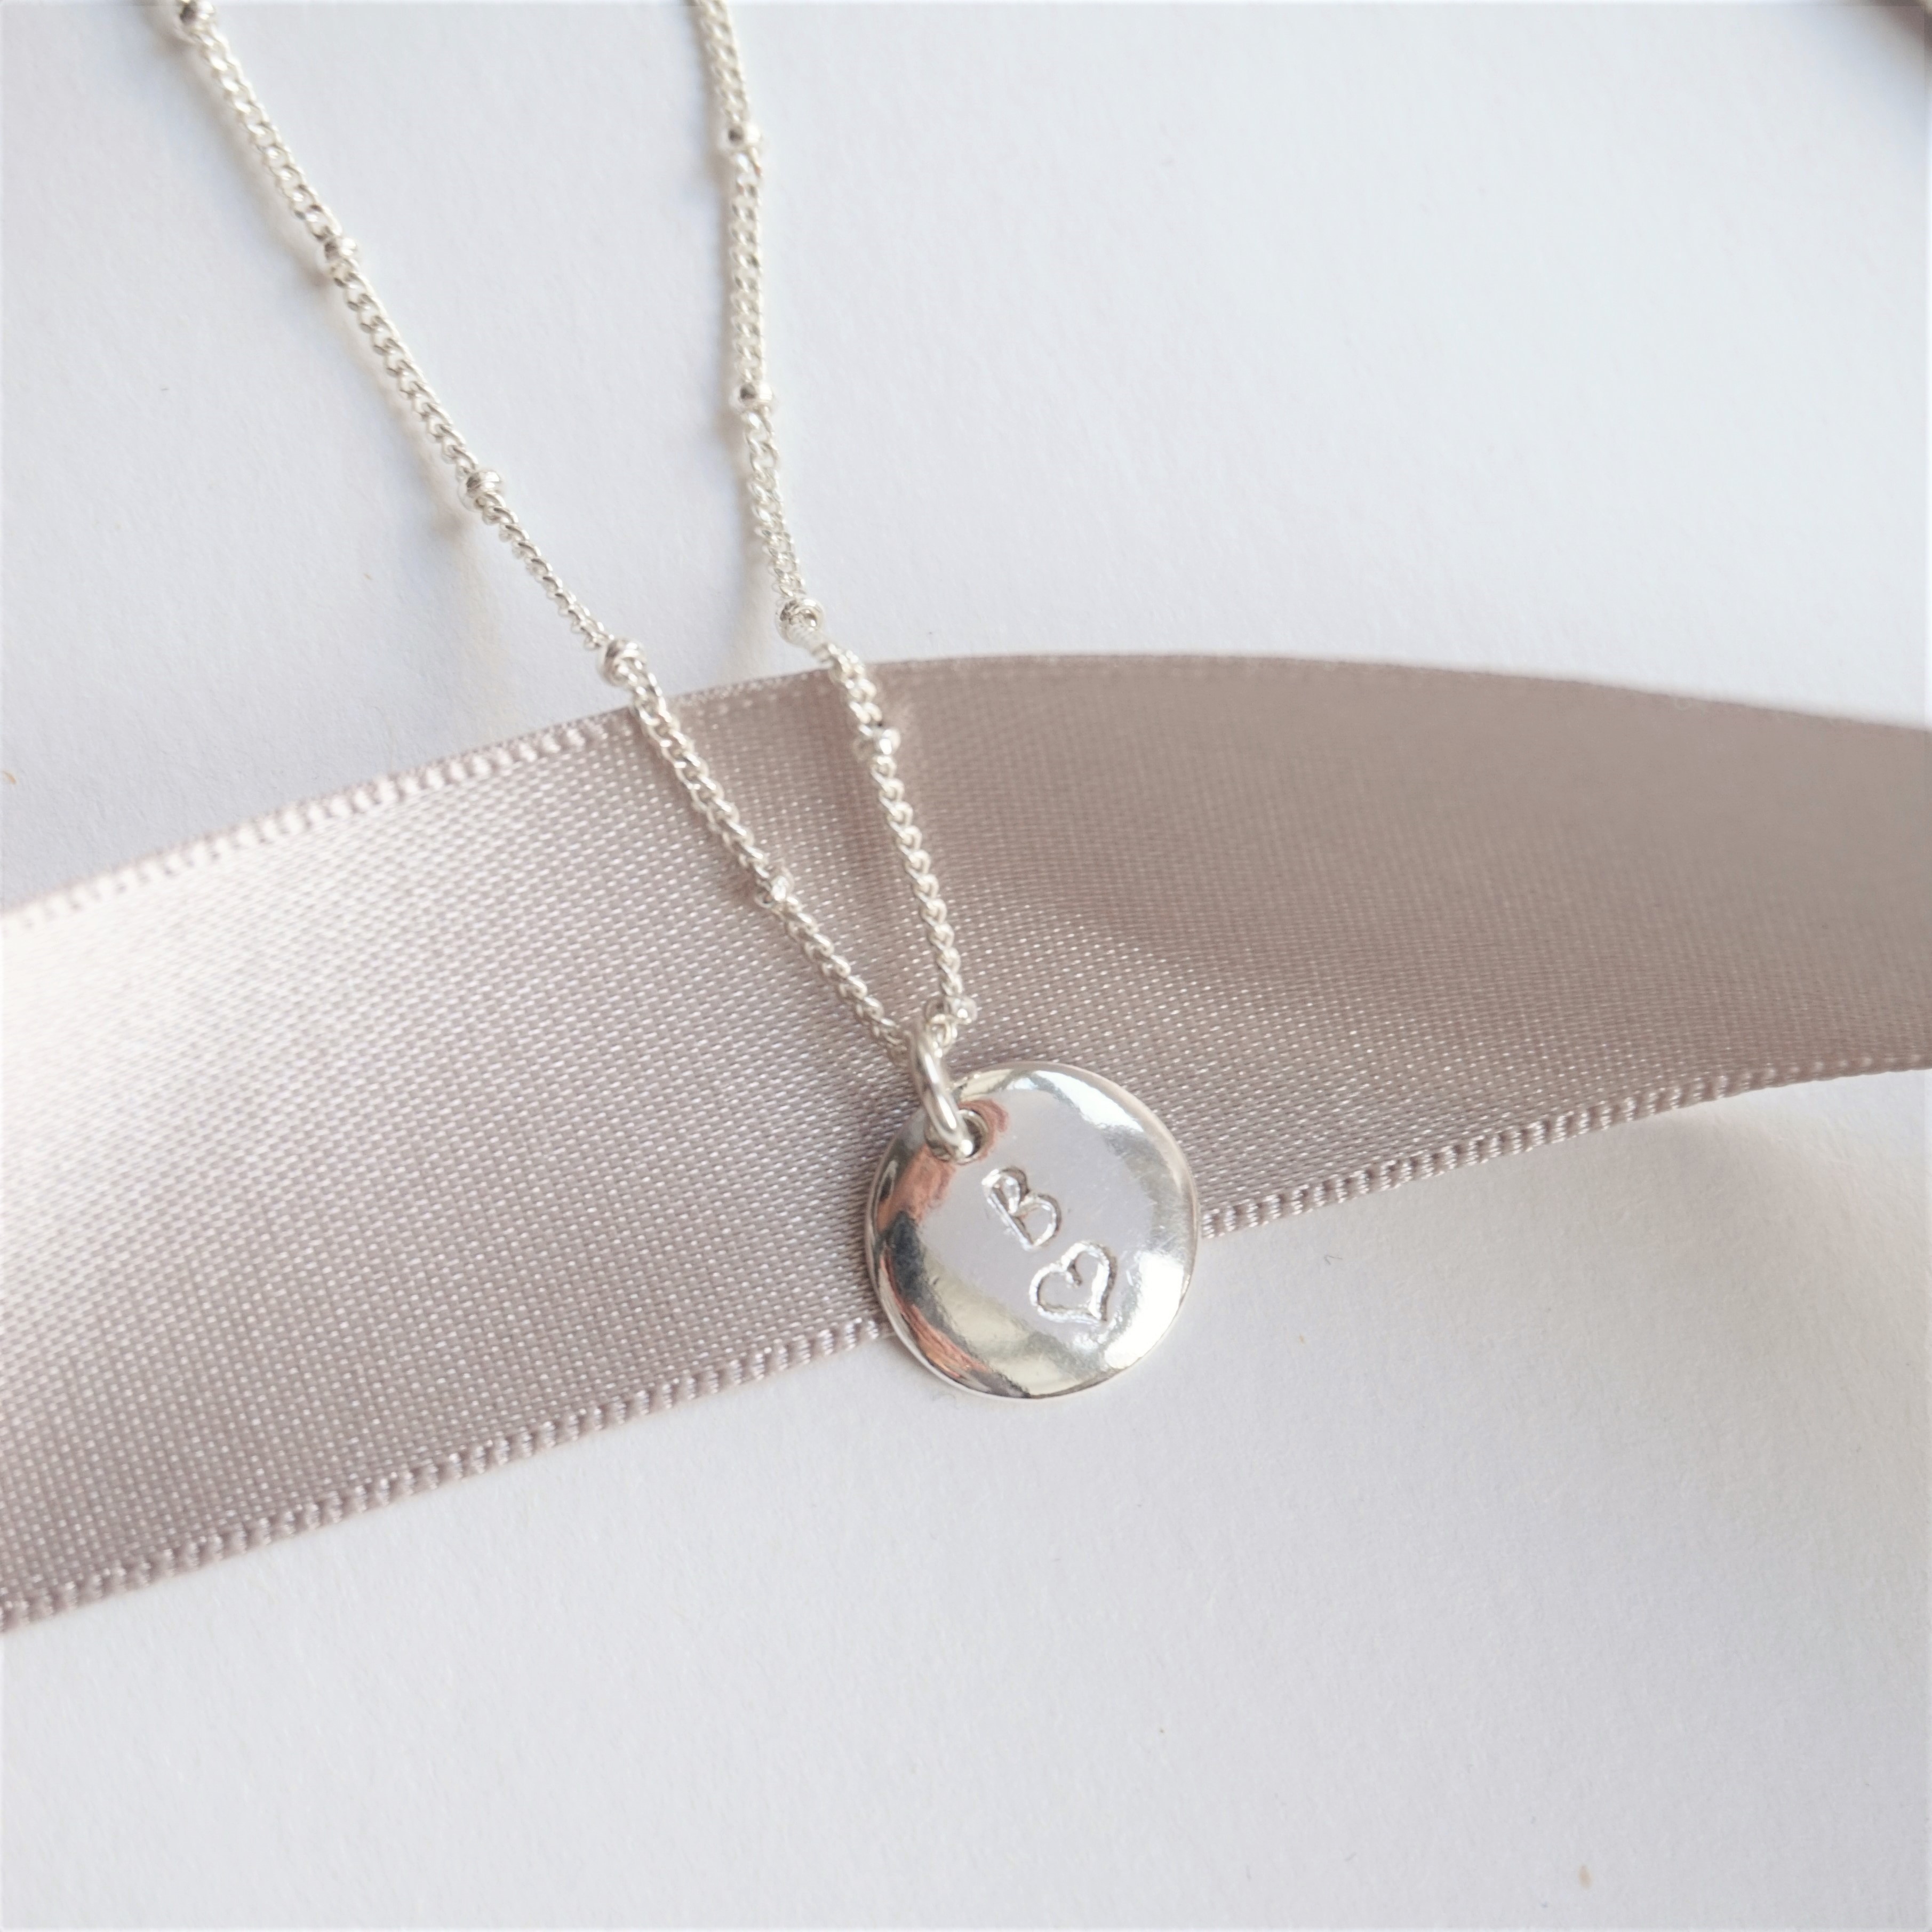 sterling silver necklace with stamped initial heart charm